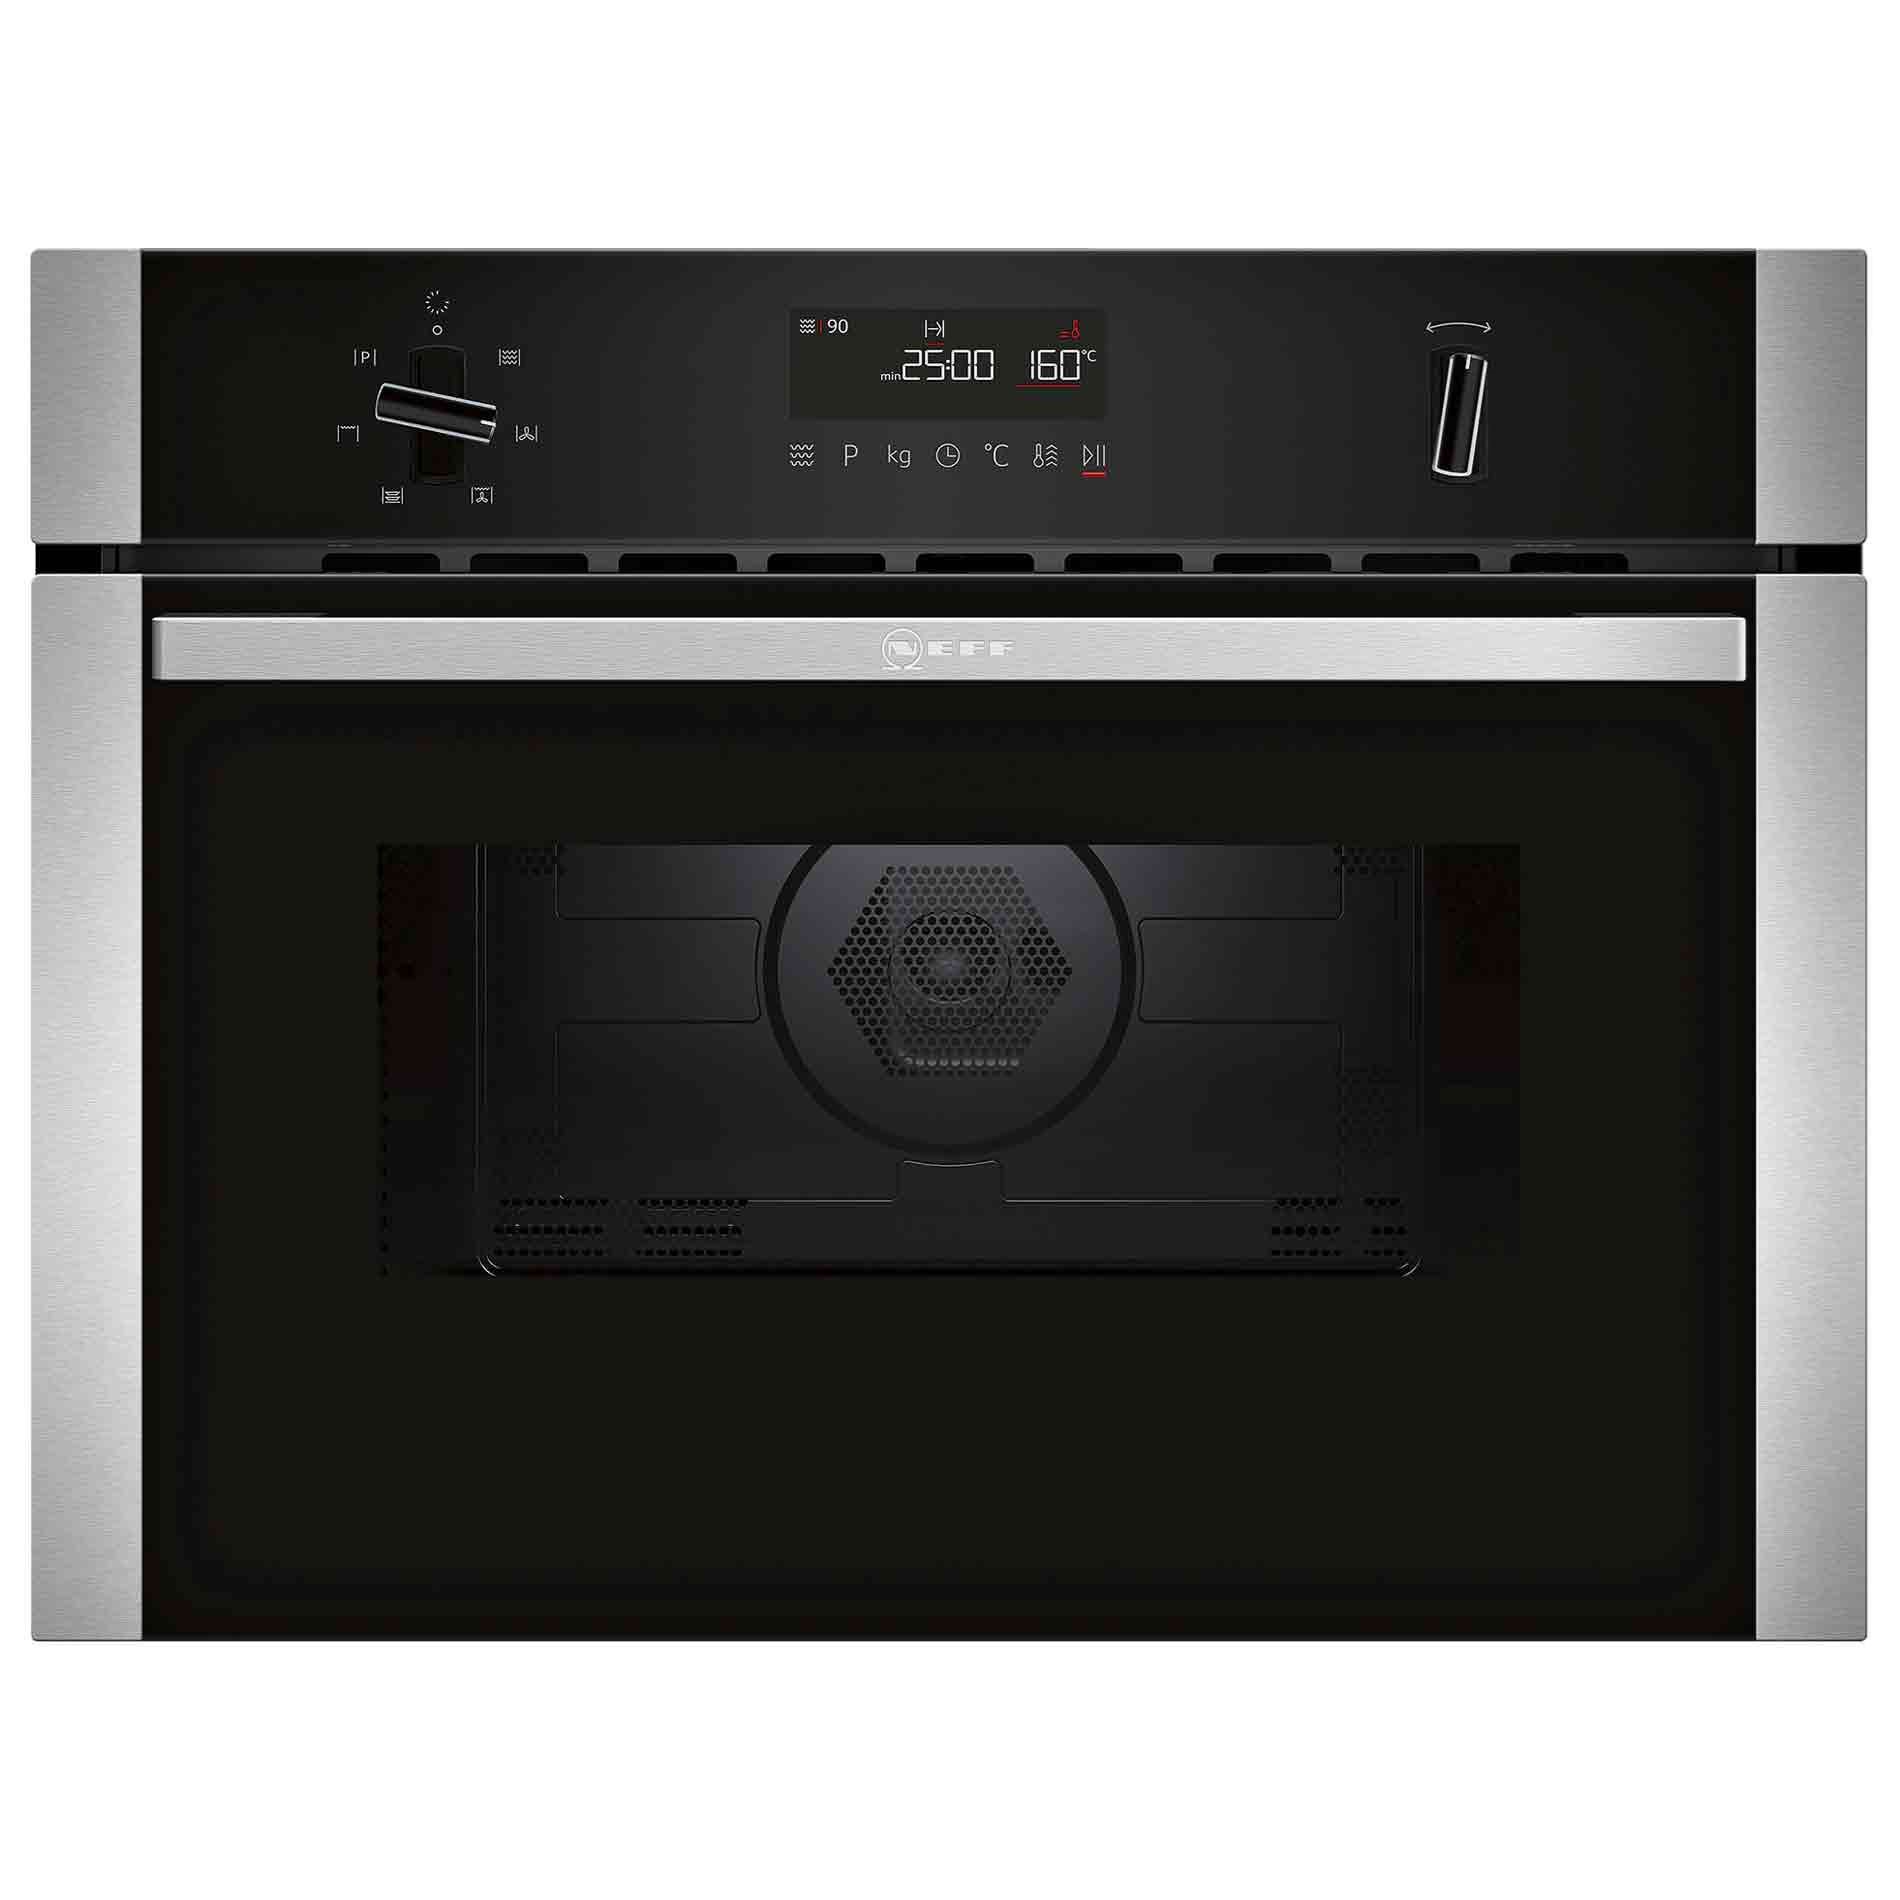 Picture of Neff C1AMG84N0B Built-in Oven Microwave